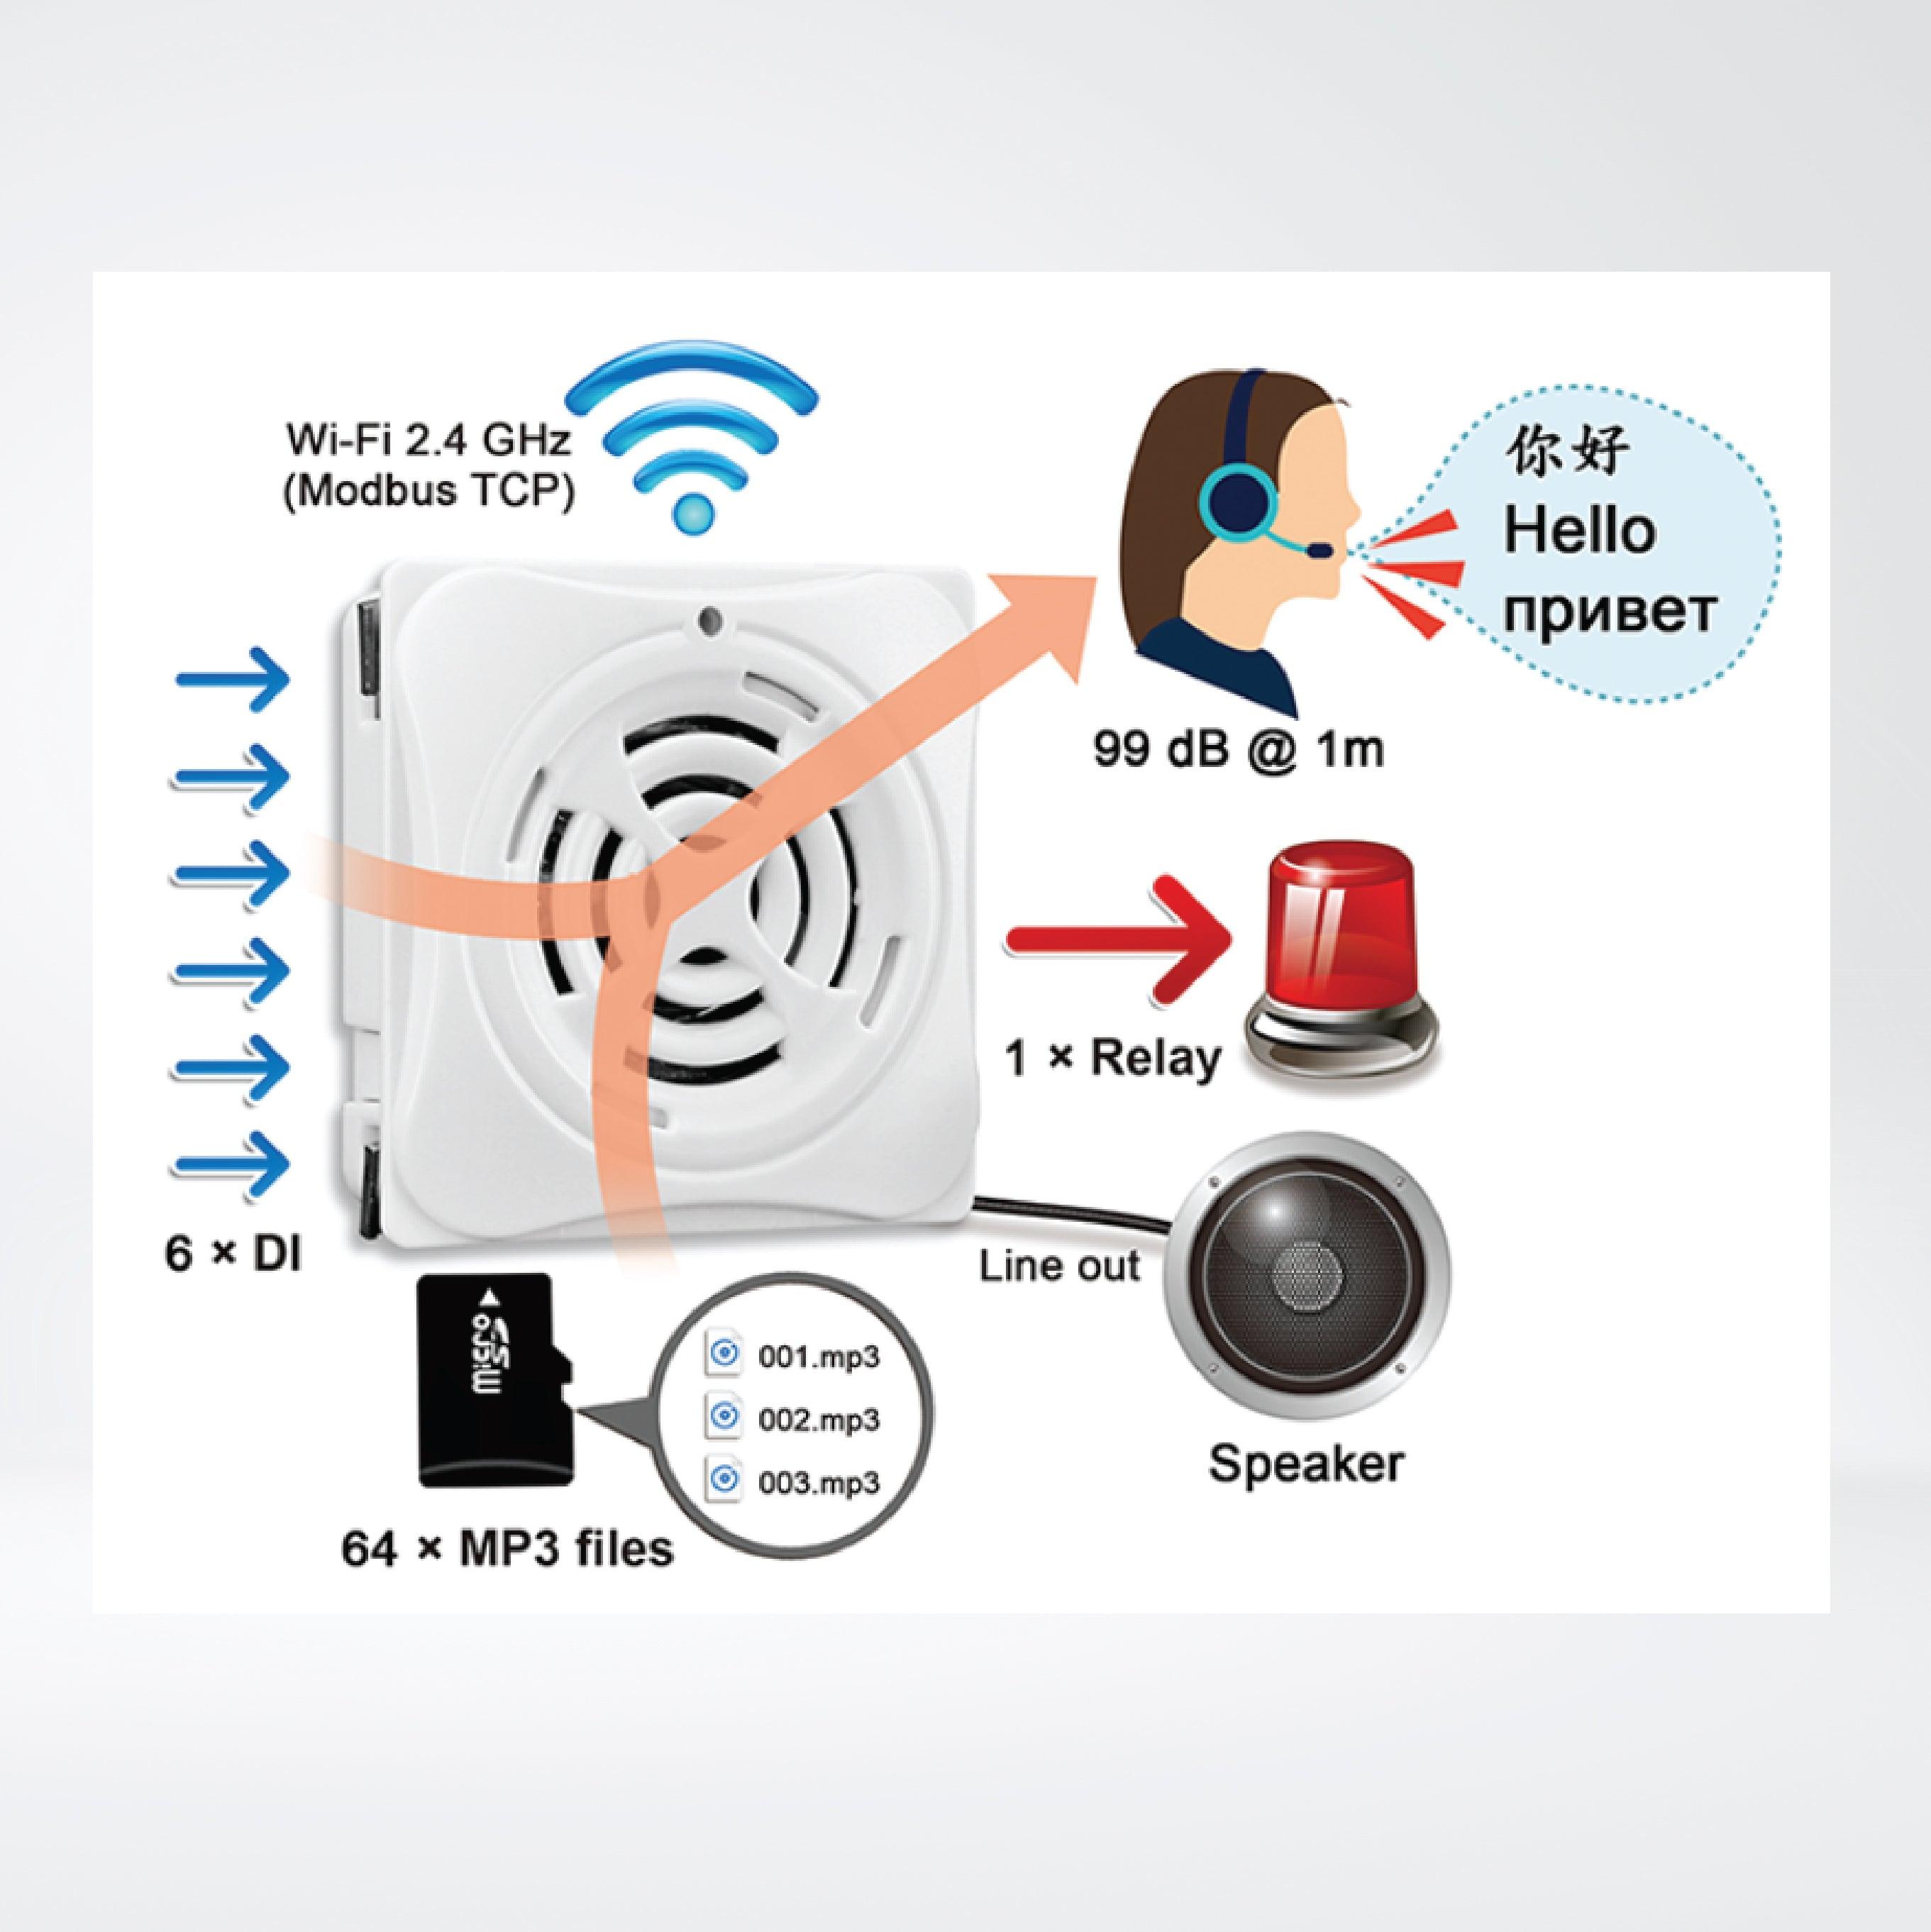 ALM-06-WF MP3 Alert module with Wi-Fi connection, 6-ch DI and 1-ch Relay Output (Asia Only) - Riverplus